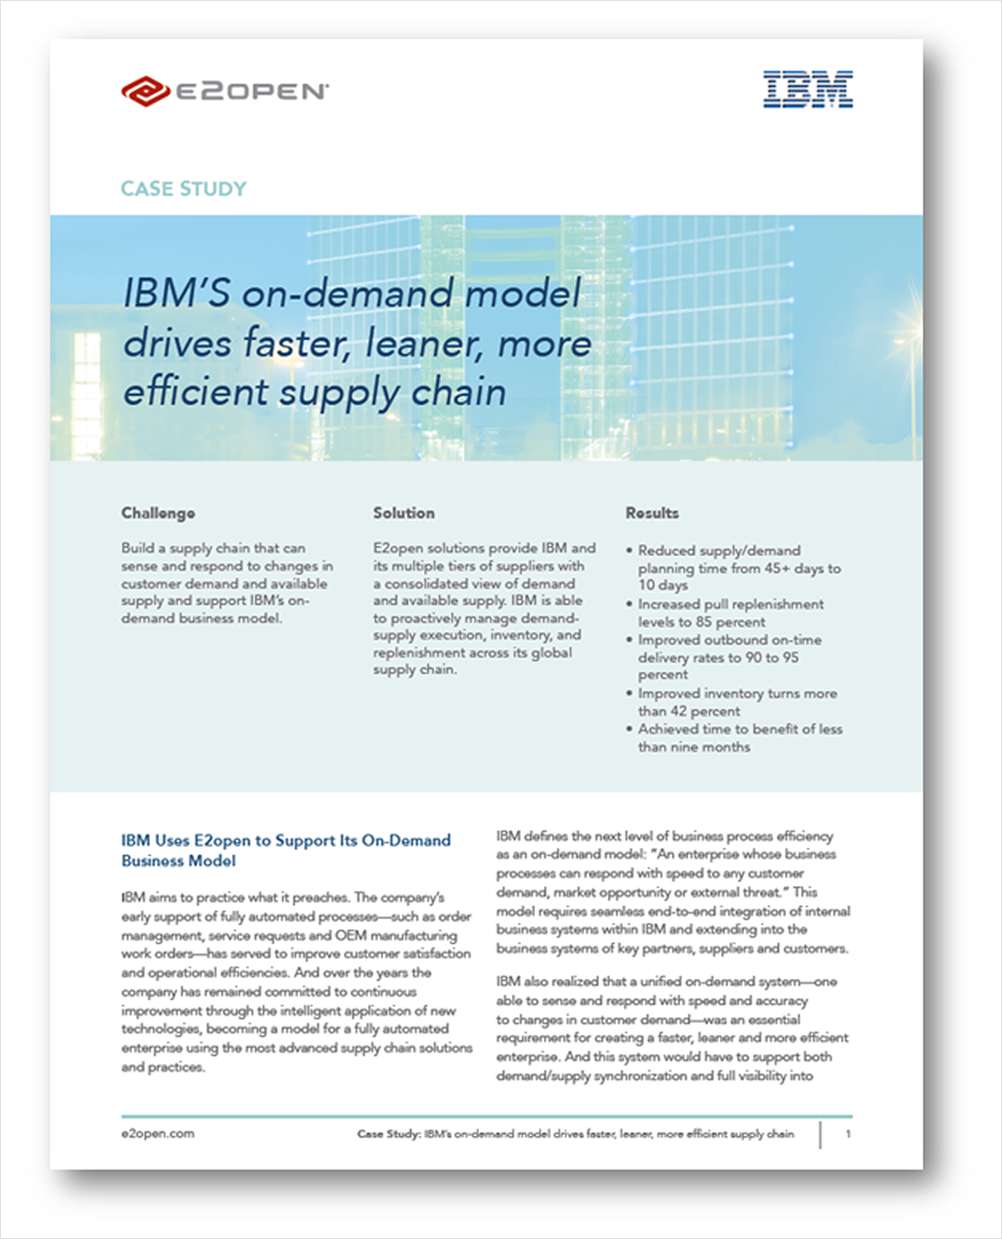 IBM's On-Demand Model Drives Faster, Leaner, More Efficient Supply Chain